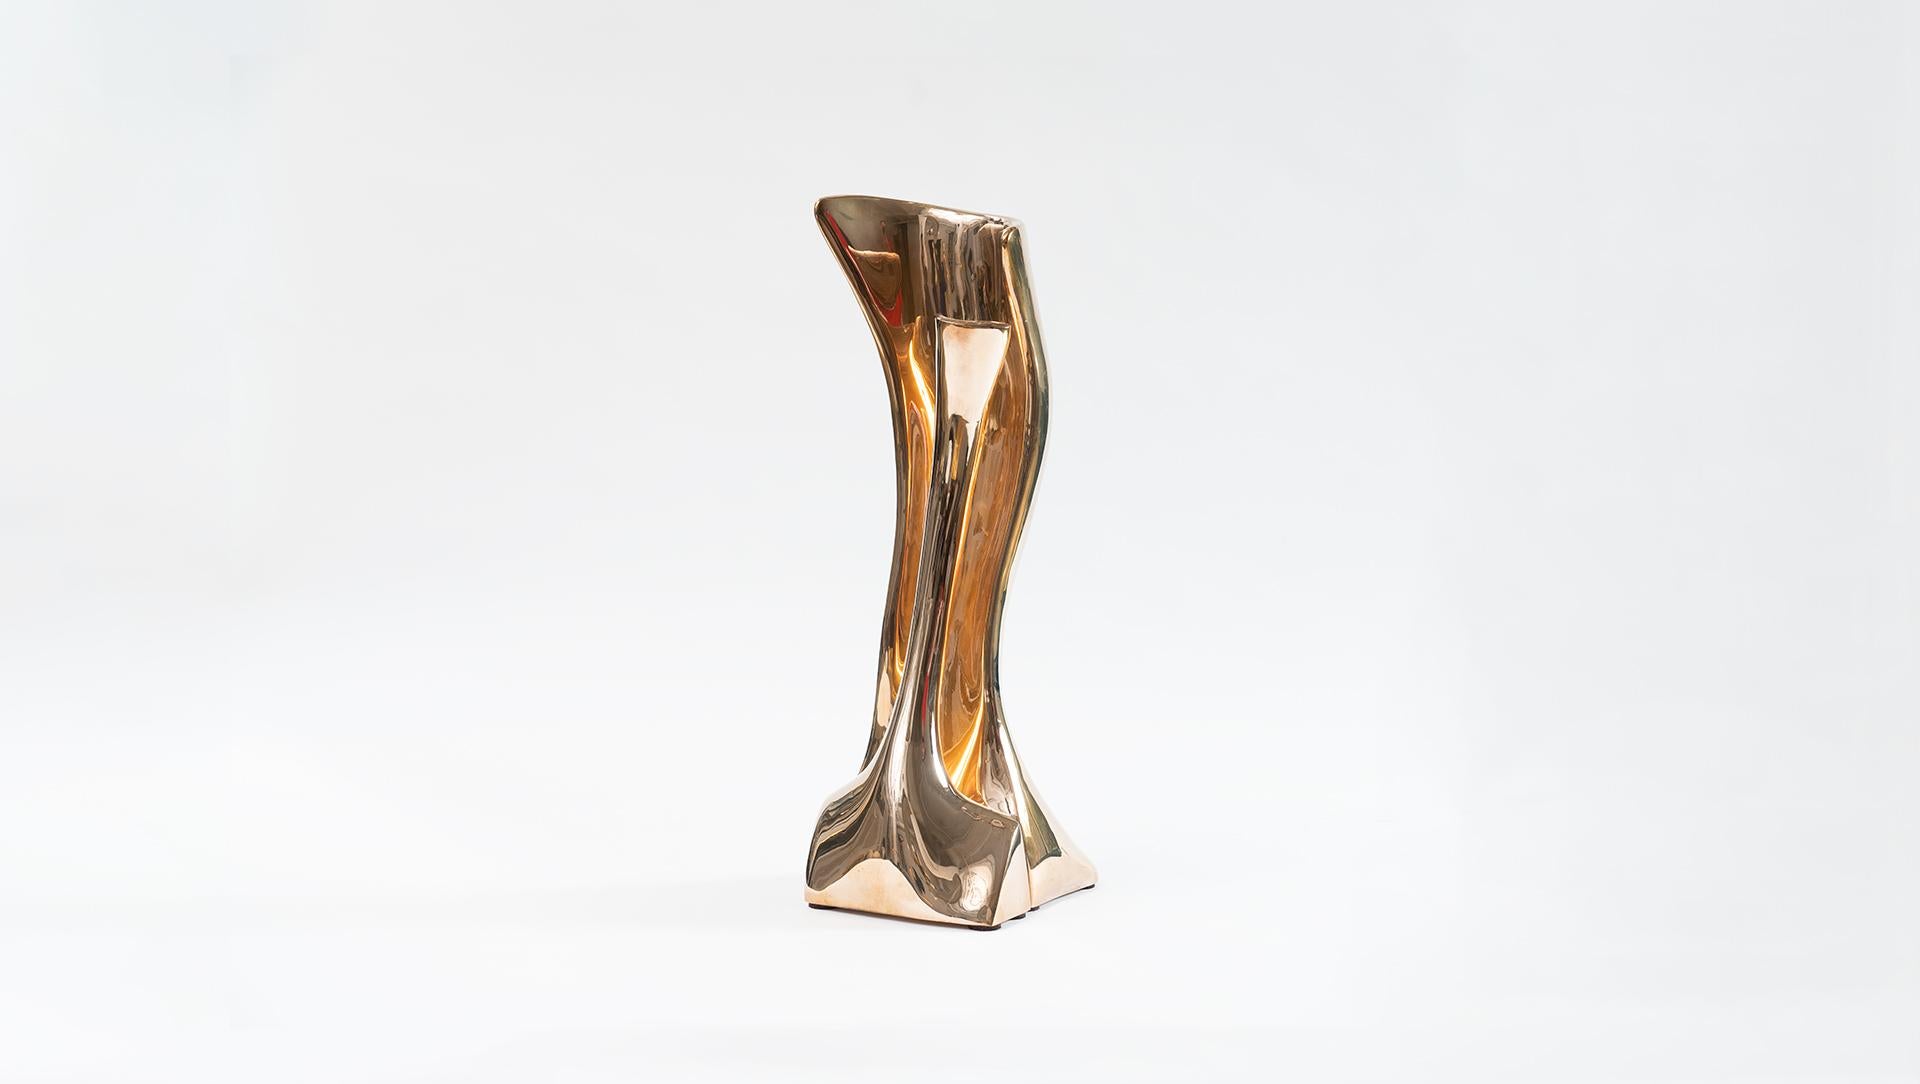 True to form, Alex Roskin’s LED sculptural lamp, in brass, has the same perfectly proportioned curves as his unique bronze and steel furniture pieces. Internal LEDs bounce off of the polished brass, giving the work a warm, glow that punctuates its